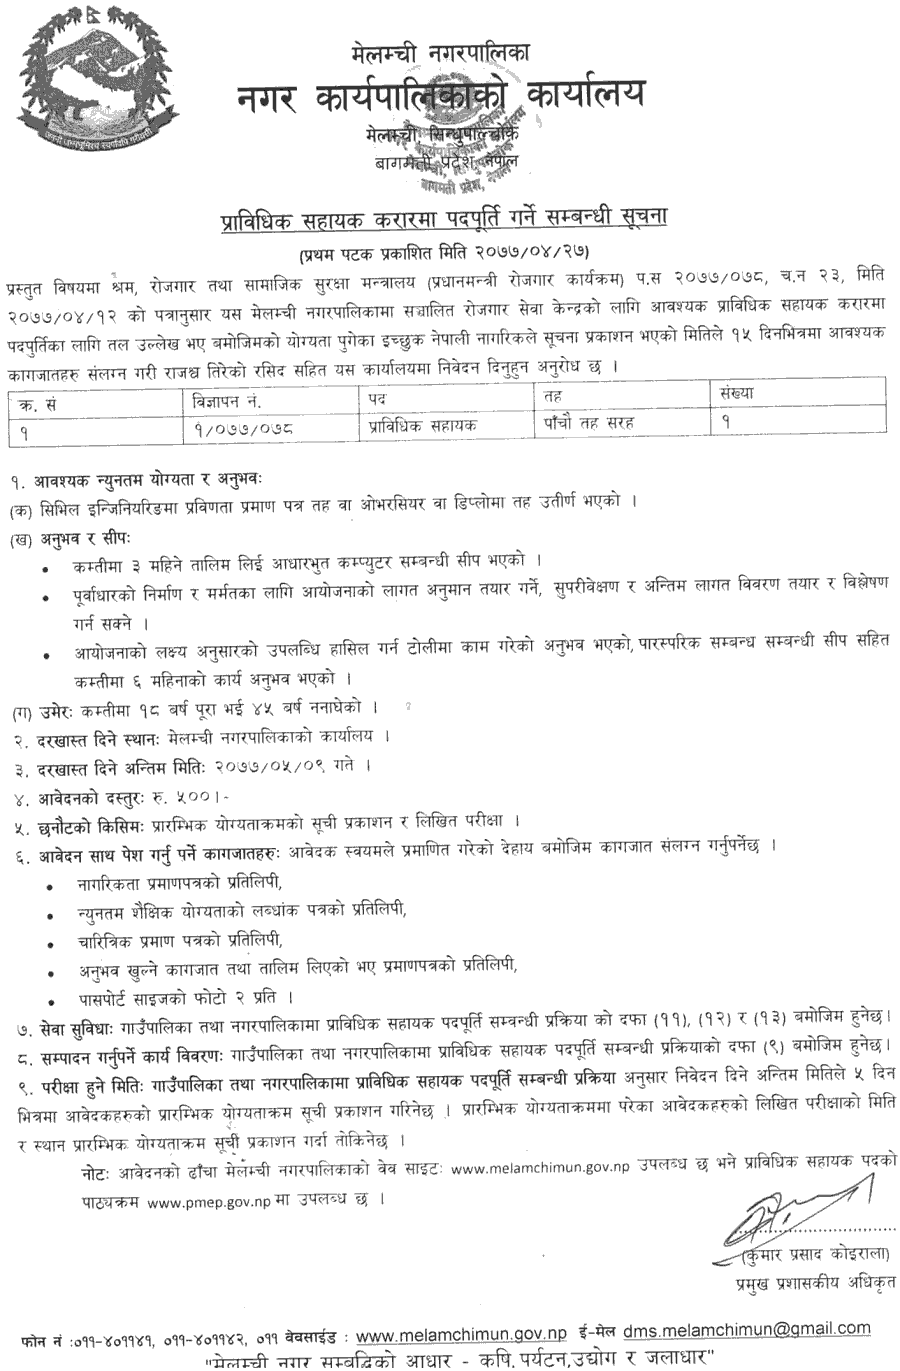 Melamchi Municipality Vacancy for Technical Assistant